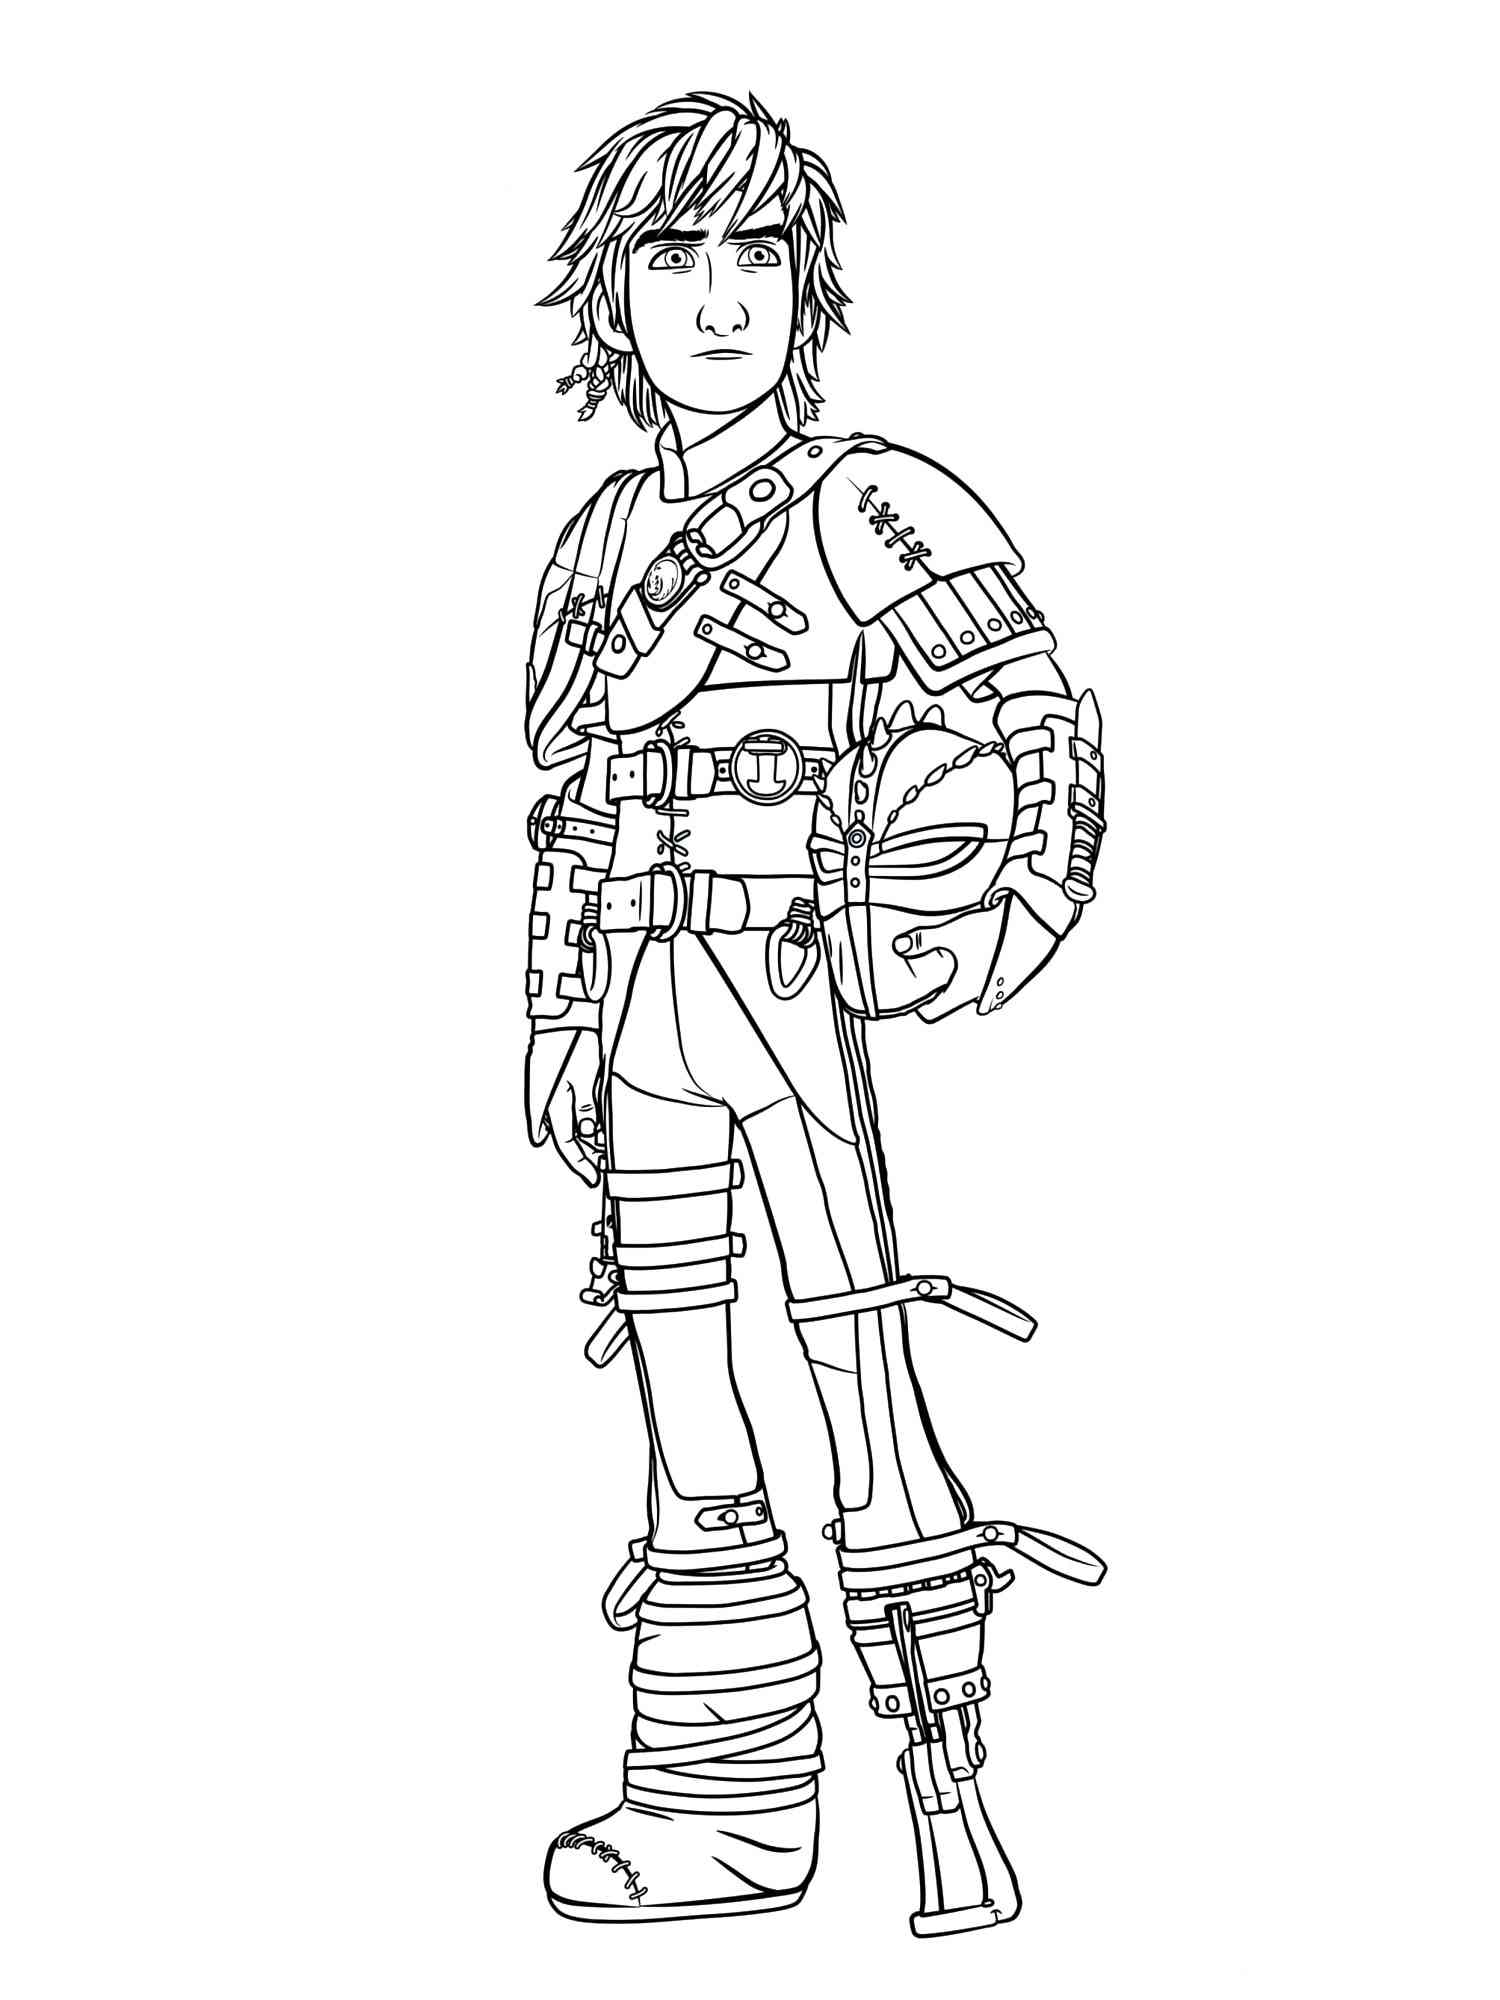 Hiccup 8 coloring page